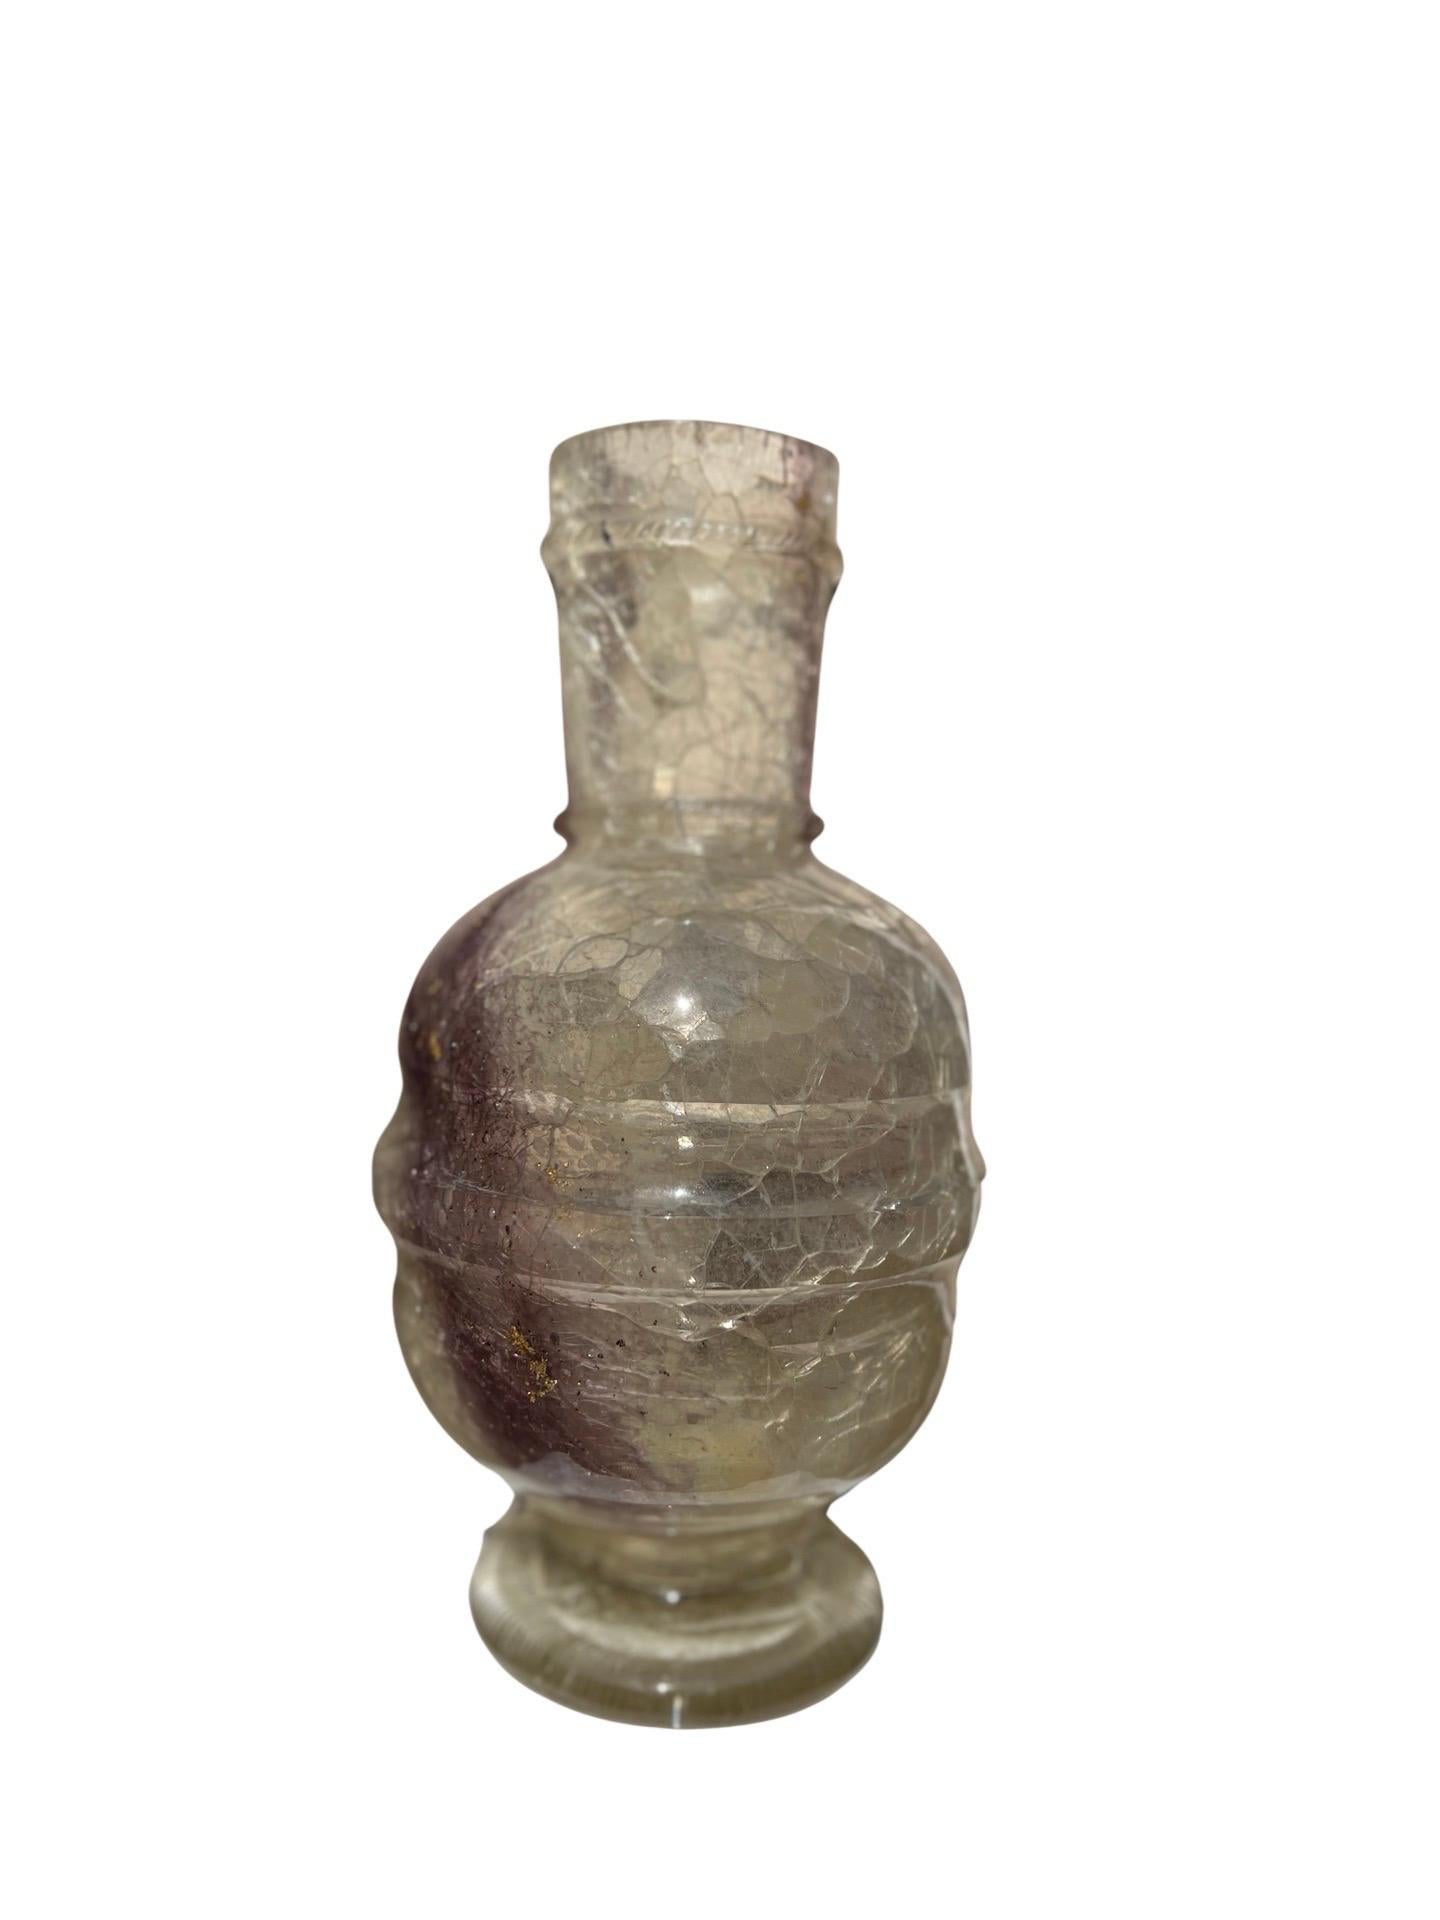 After The Roman Antique - Rock Crystal, Glass & Gold Flecking Grand Tour Pitcher For Sale 3